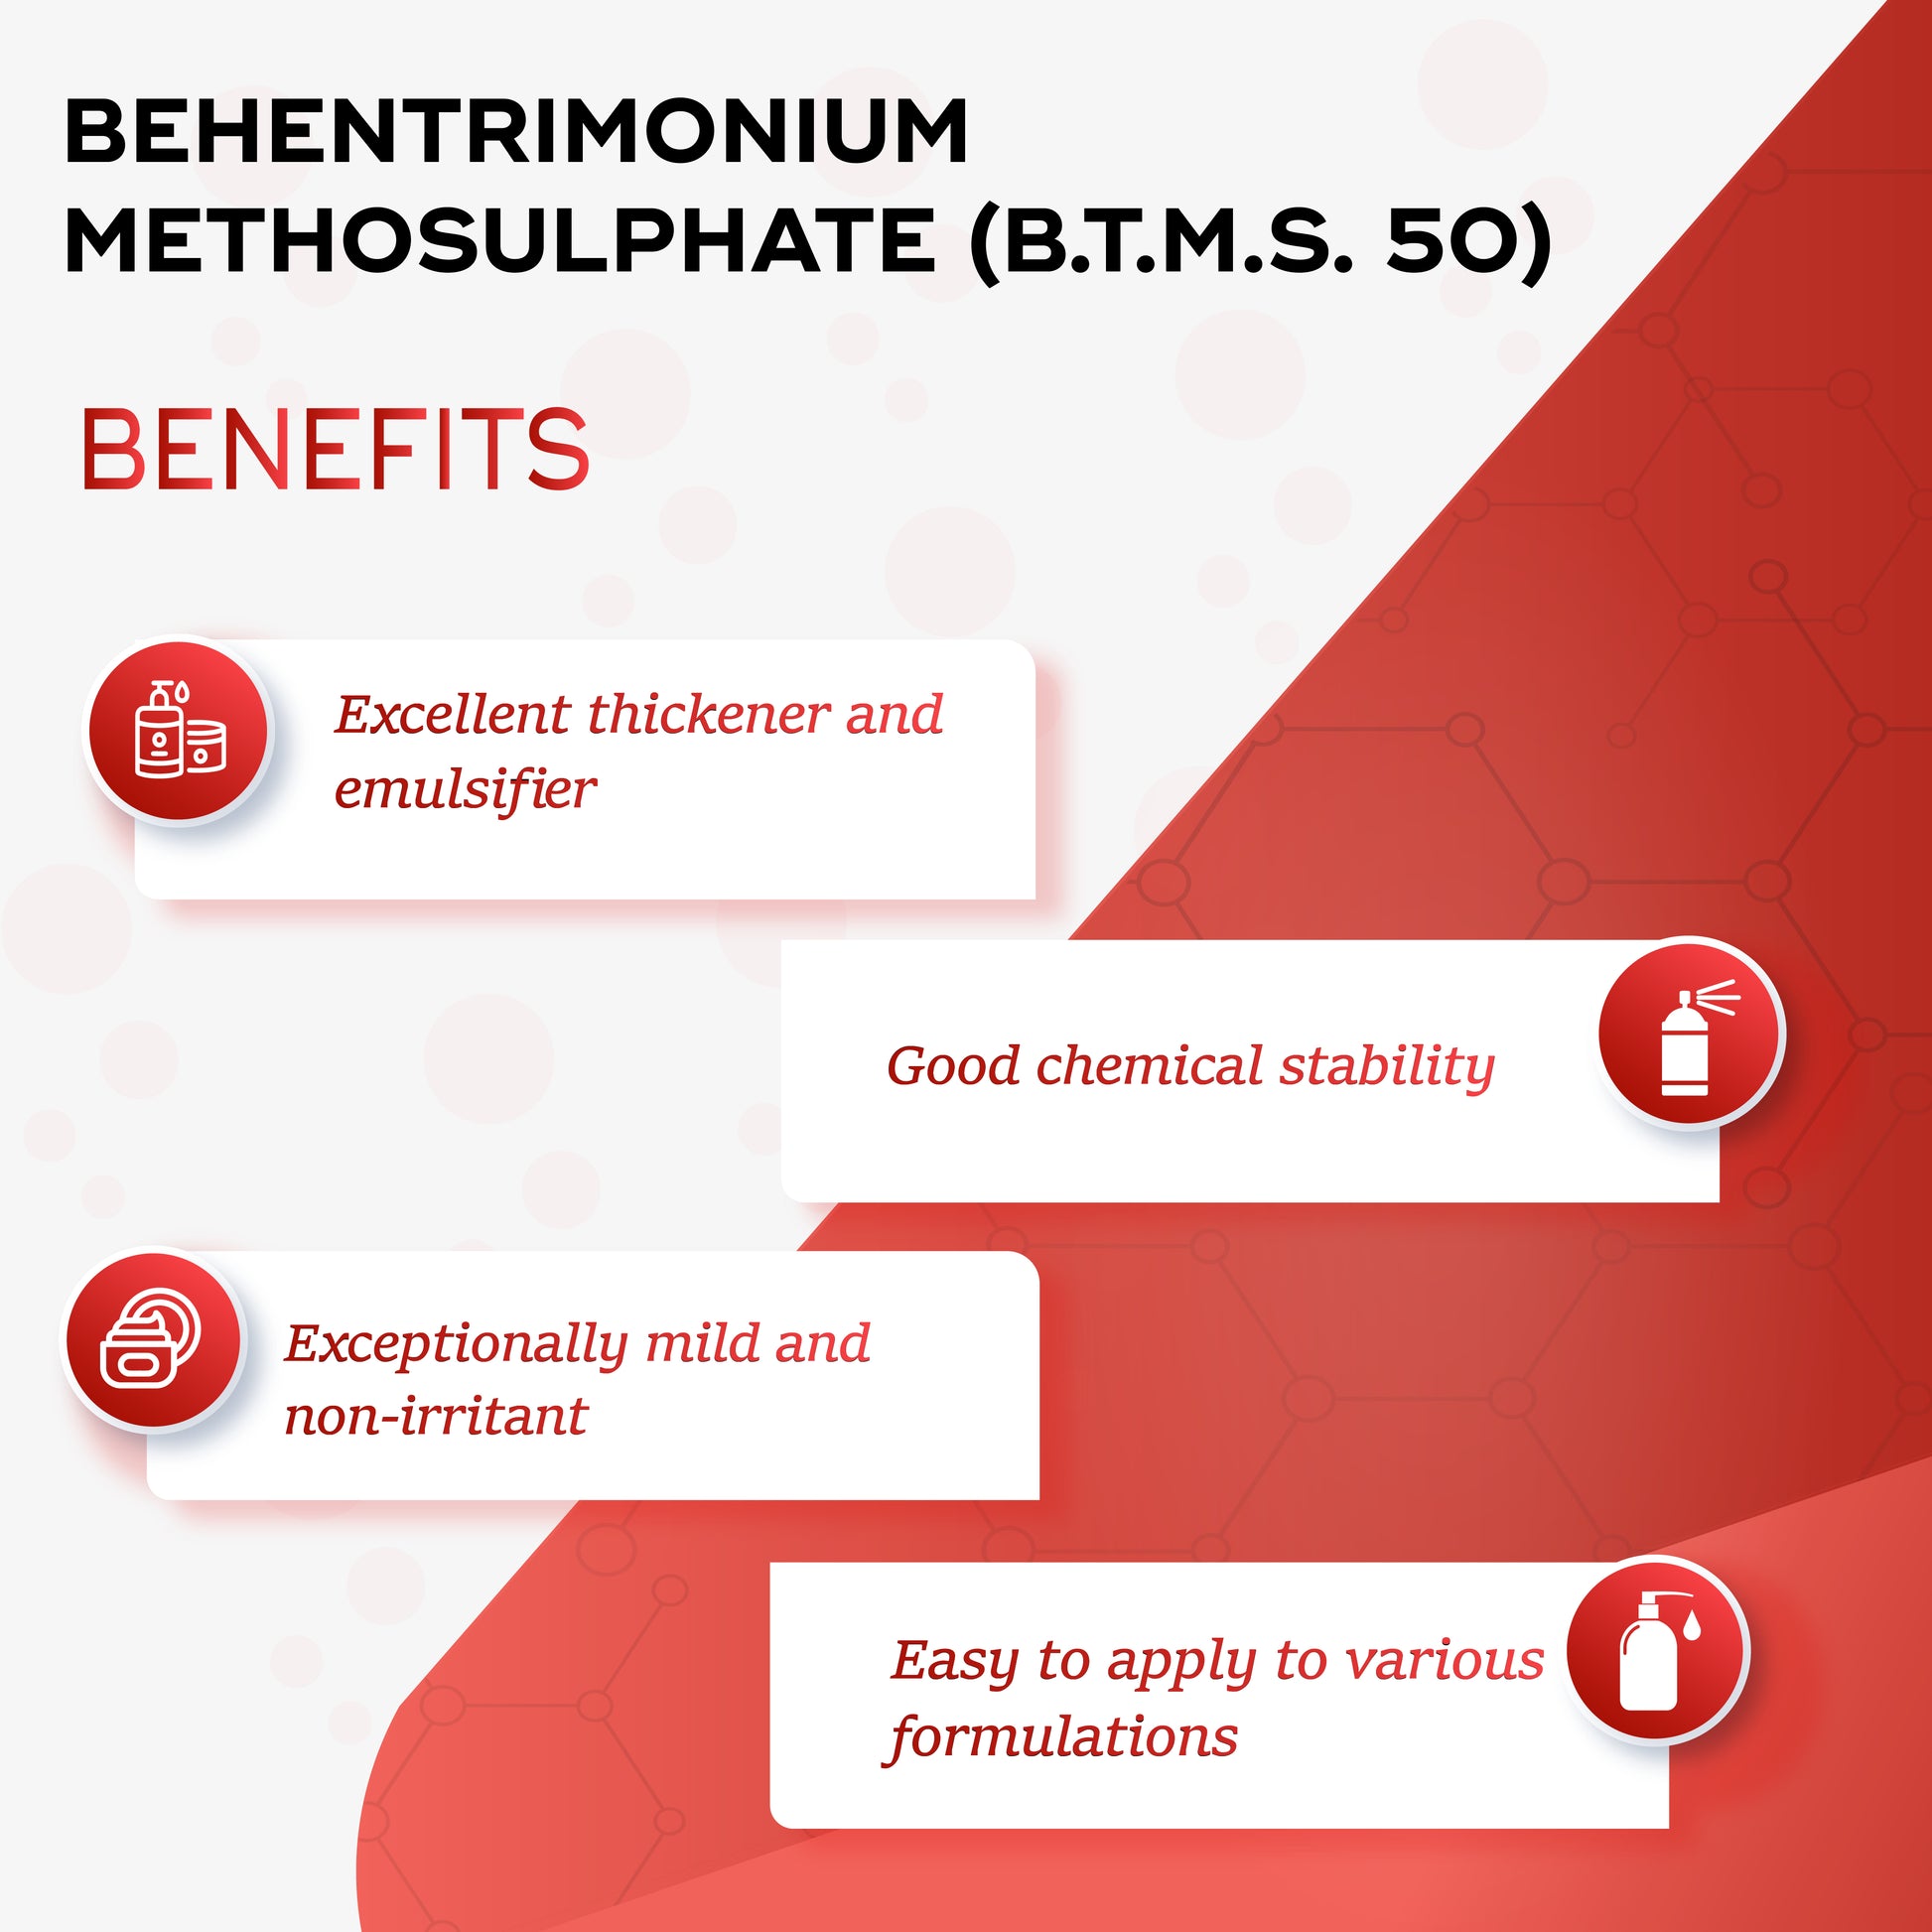 COSMETICS FORMULATION SCHOOL on Instagram: BTMS 50 restocked!! INCI:  Behentrimonium methosulfate (and) Cetyl Alcohol Behentrimonium Methosulfate  is a quaternary ammonium salt derived from the natural rapeseed Oil. It is  a conditioning agent